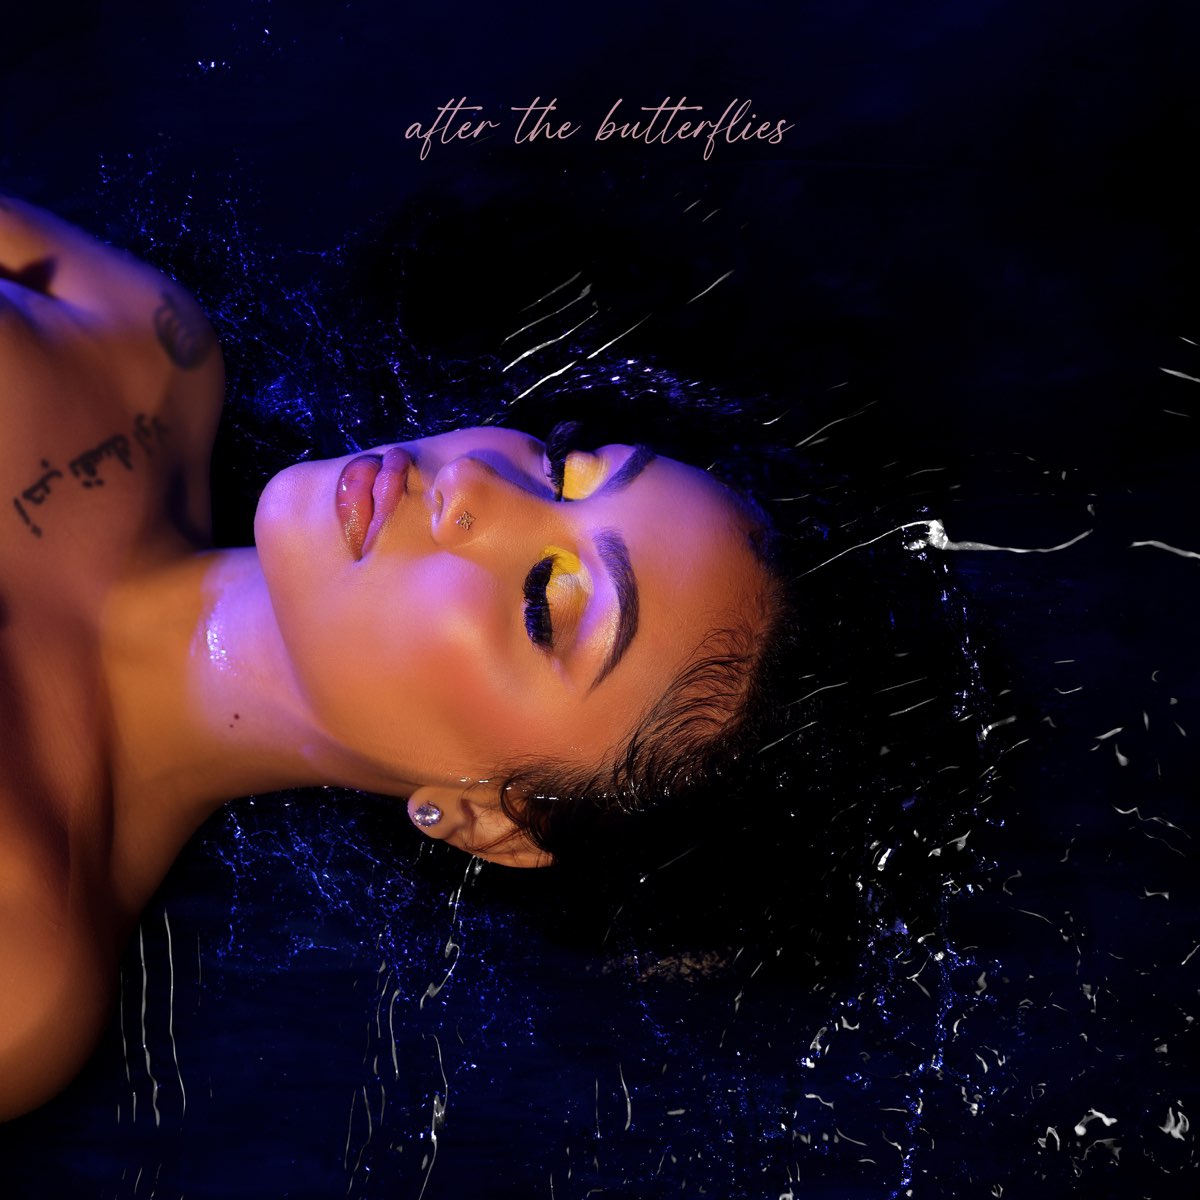 1200X1200Bf 60 After The Butterflies By Queen Naija